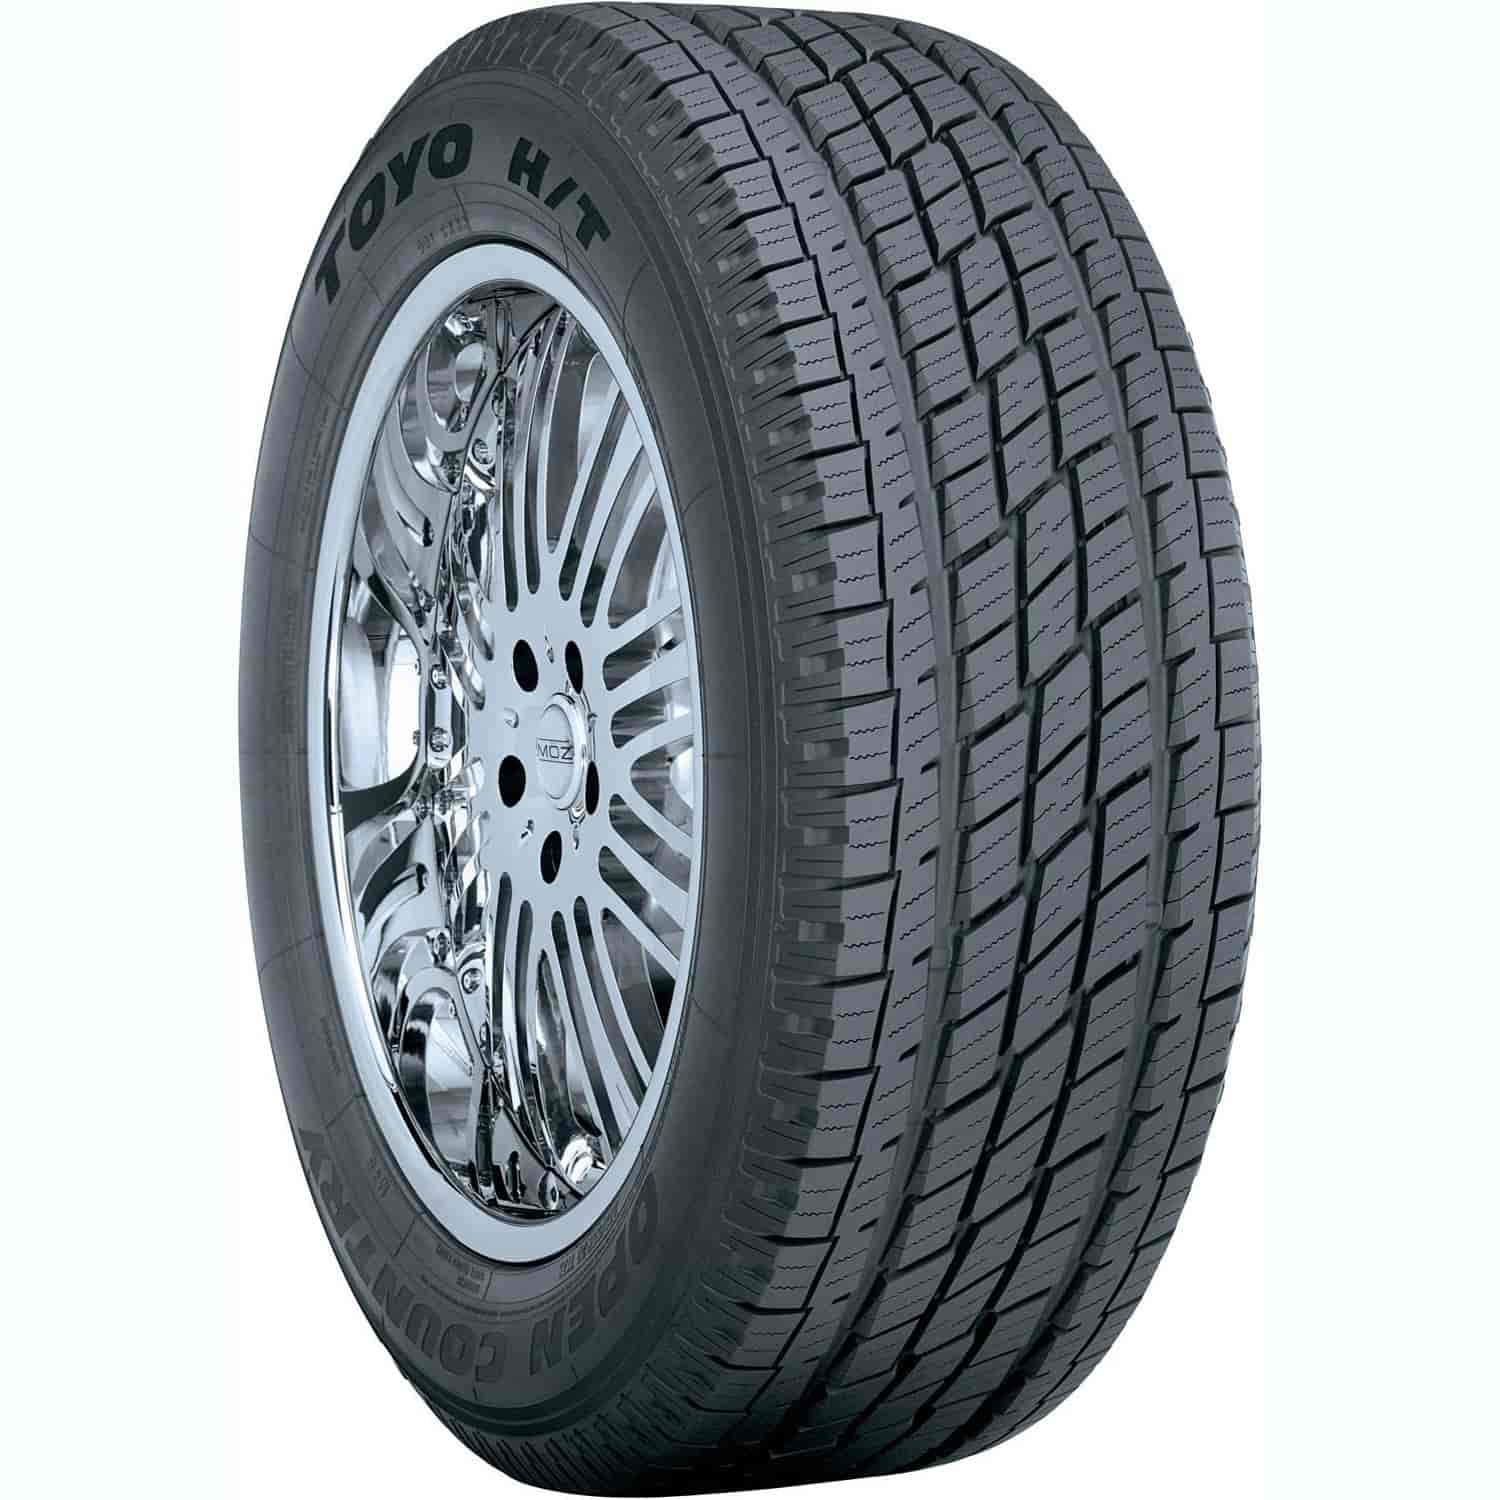 OPEN COUNTRY H/T LT225/75R16 115S